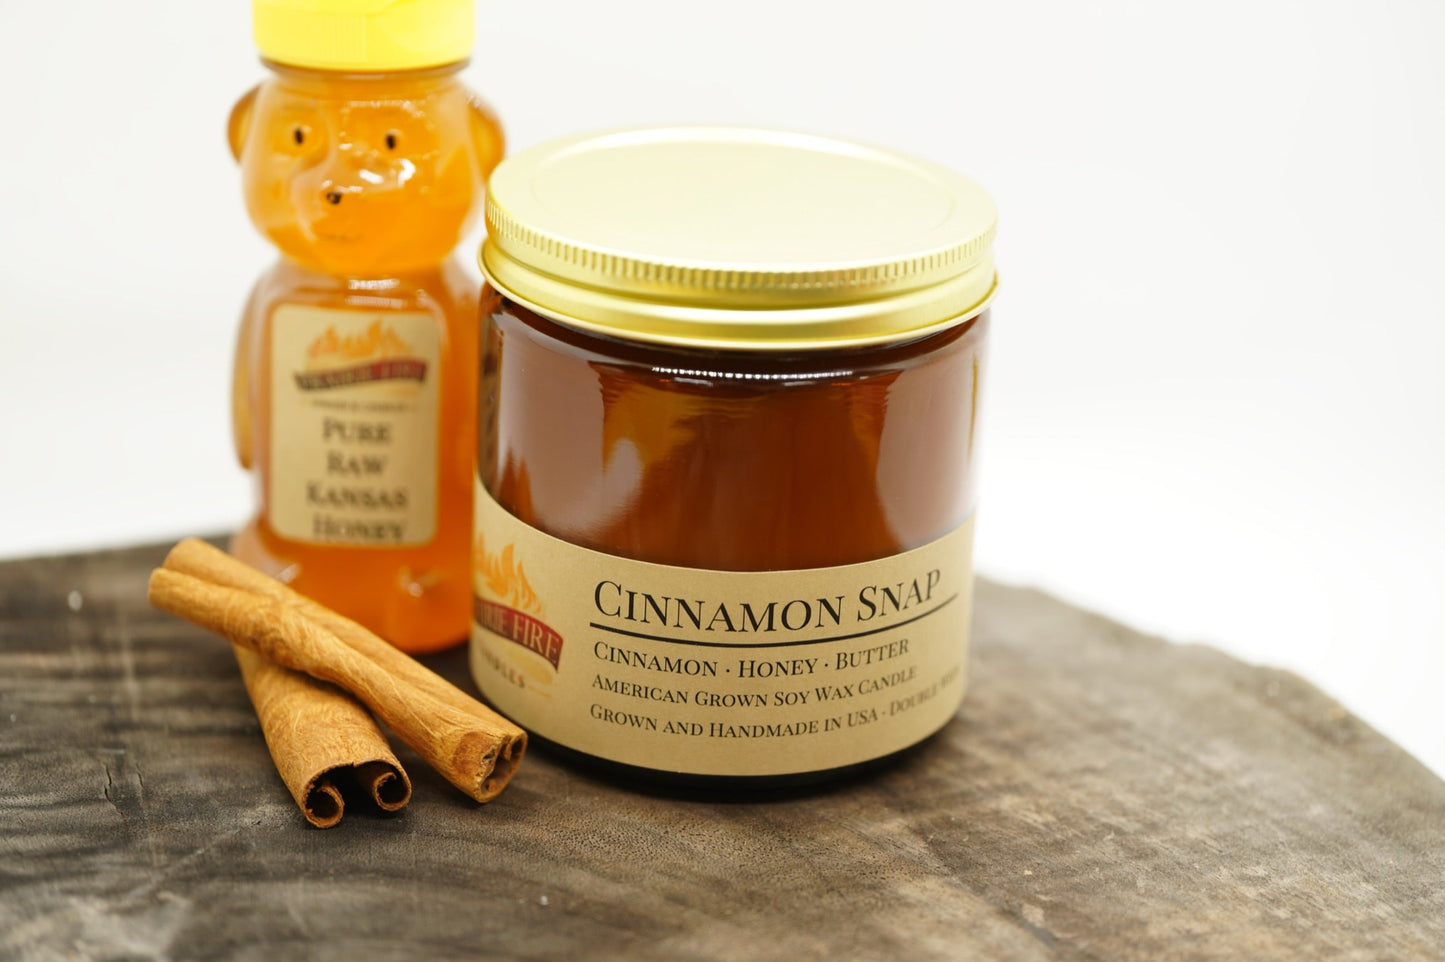 Cinnamon Snap Soy Candle | 16 oz Double Wick Amber Apothecary Jar